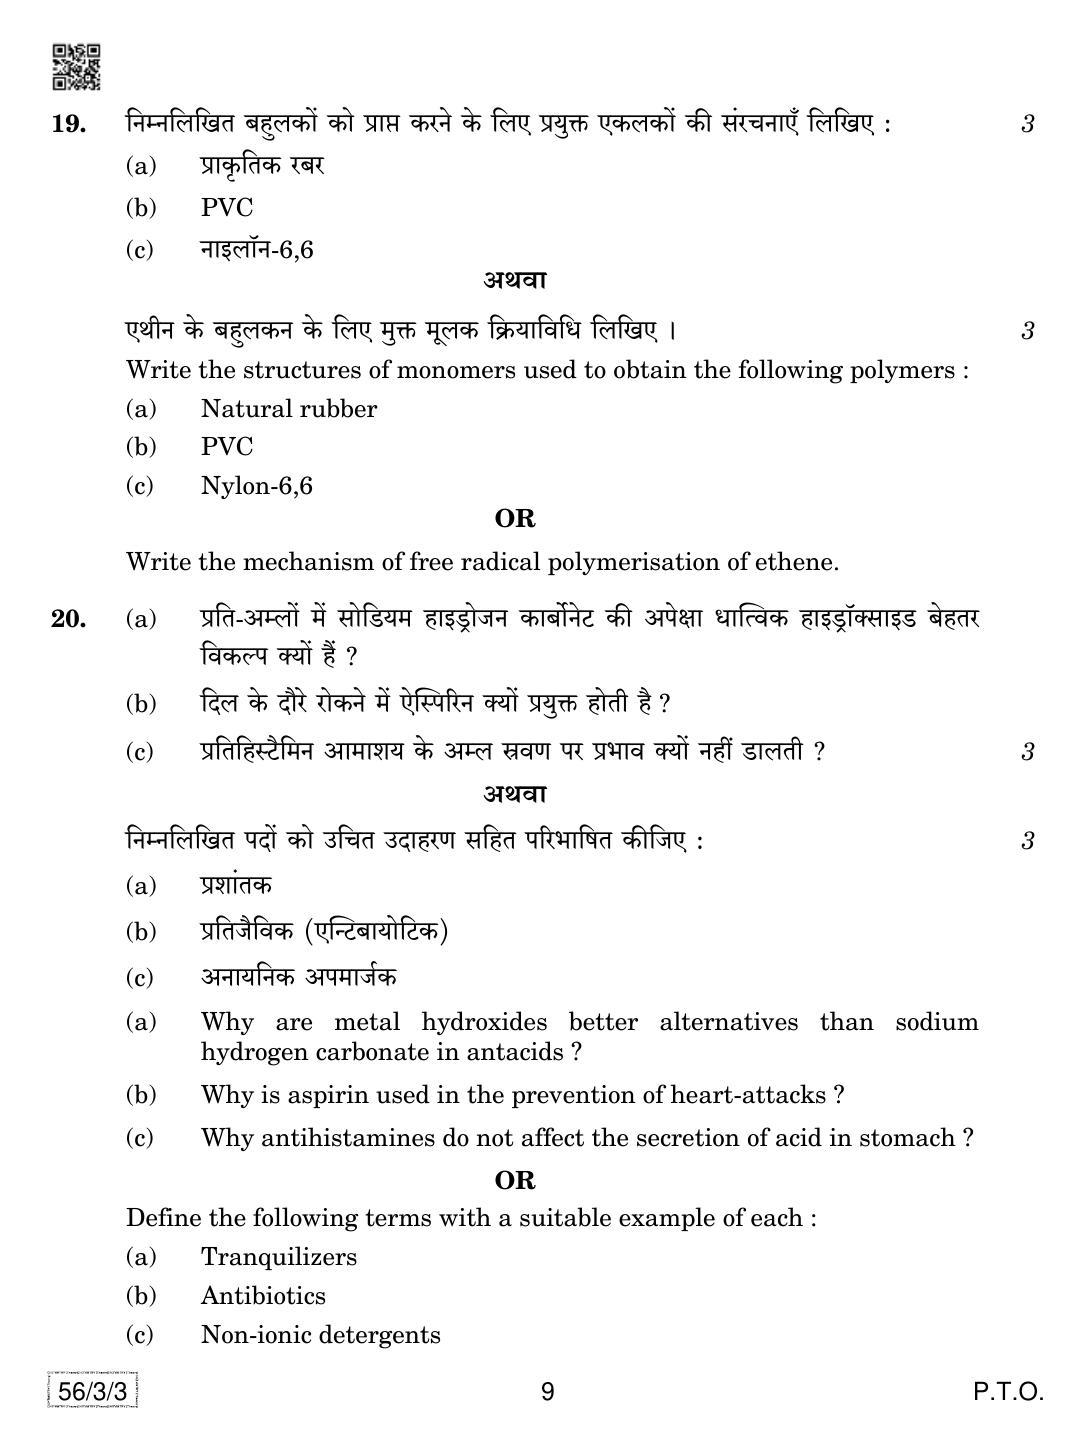 CBSE Class 12 56-3-3 Chemistry 2019 Question Paper - Page 9